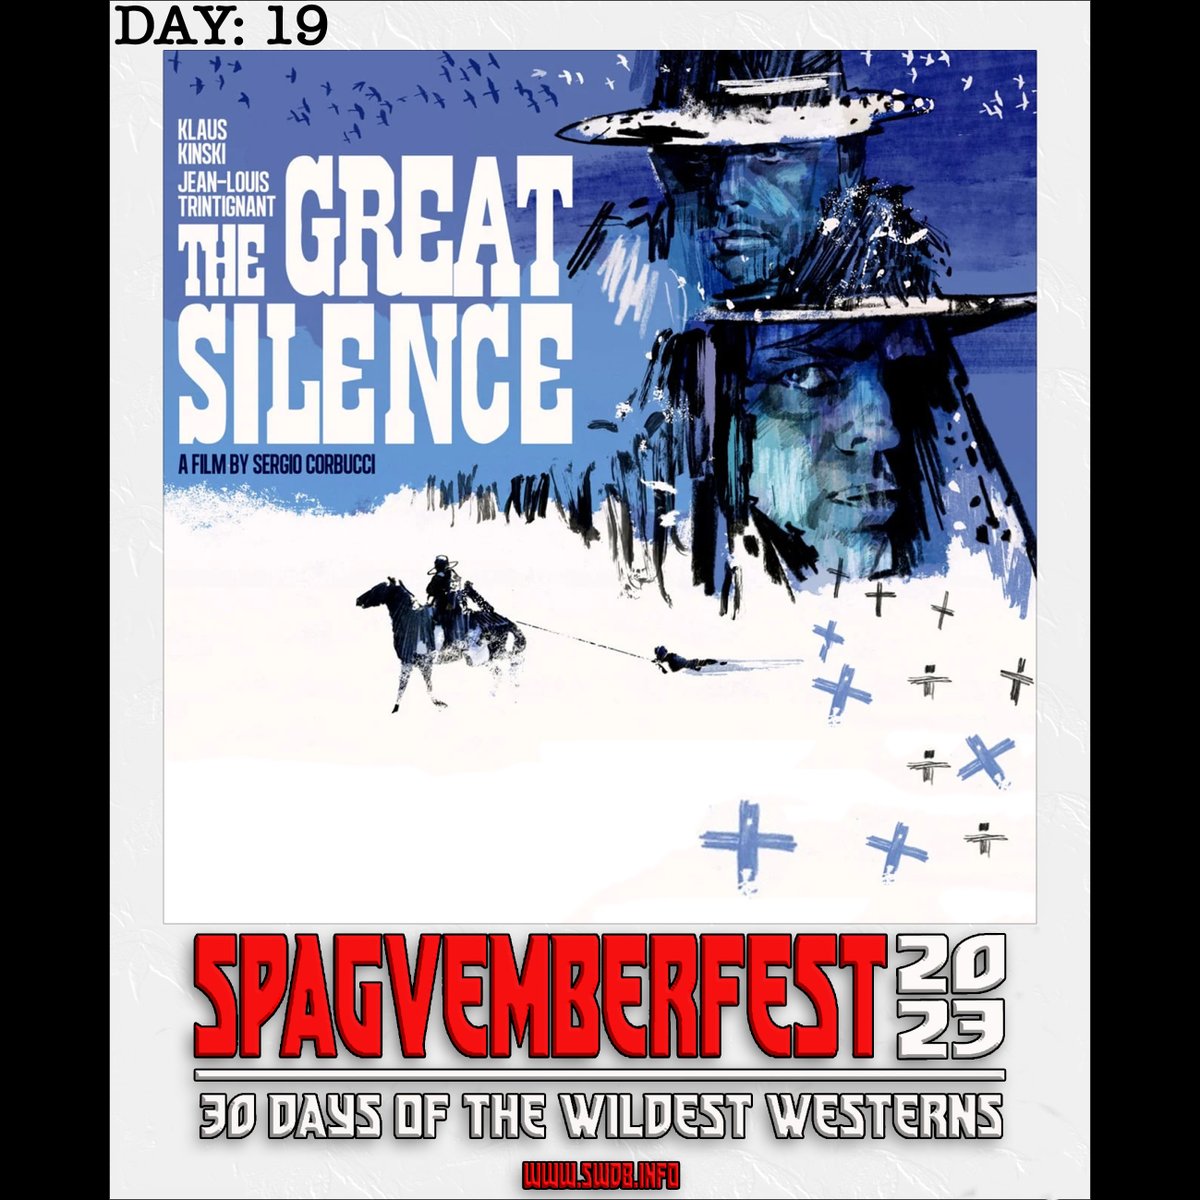 Released 55 Years ago today in 1968, Sergio Corbucci's 'The Great Silence' starring Klaus Kinski, Jean-Louis Trintignant & Frank Wolff.

also today's Spagvemberfest Offering

#spagvemberfest #thegreatsilence #sergiocorbucci #klauskinski #jeanlouistrintignant #frankwolff